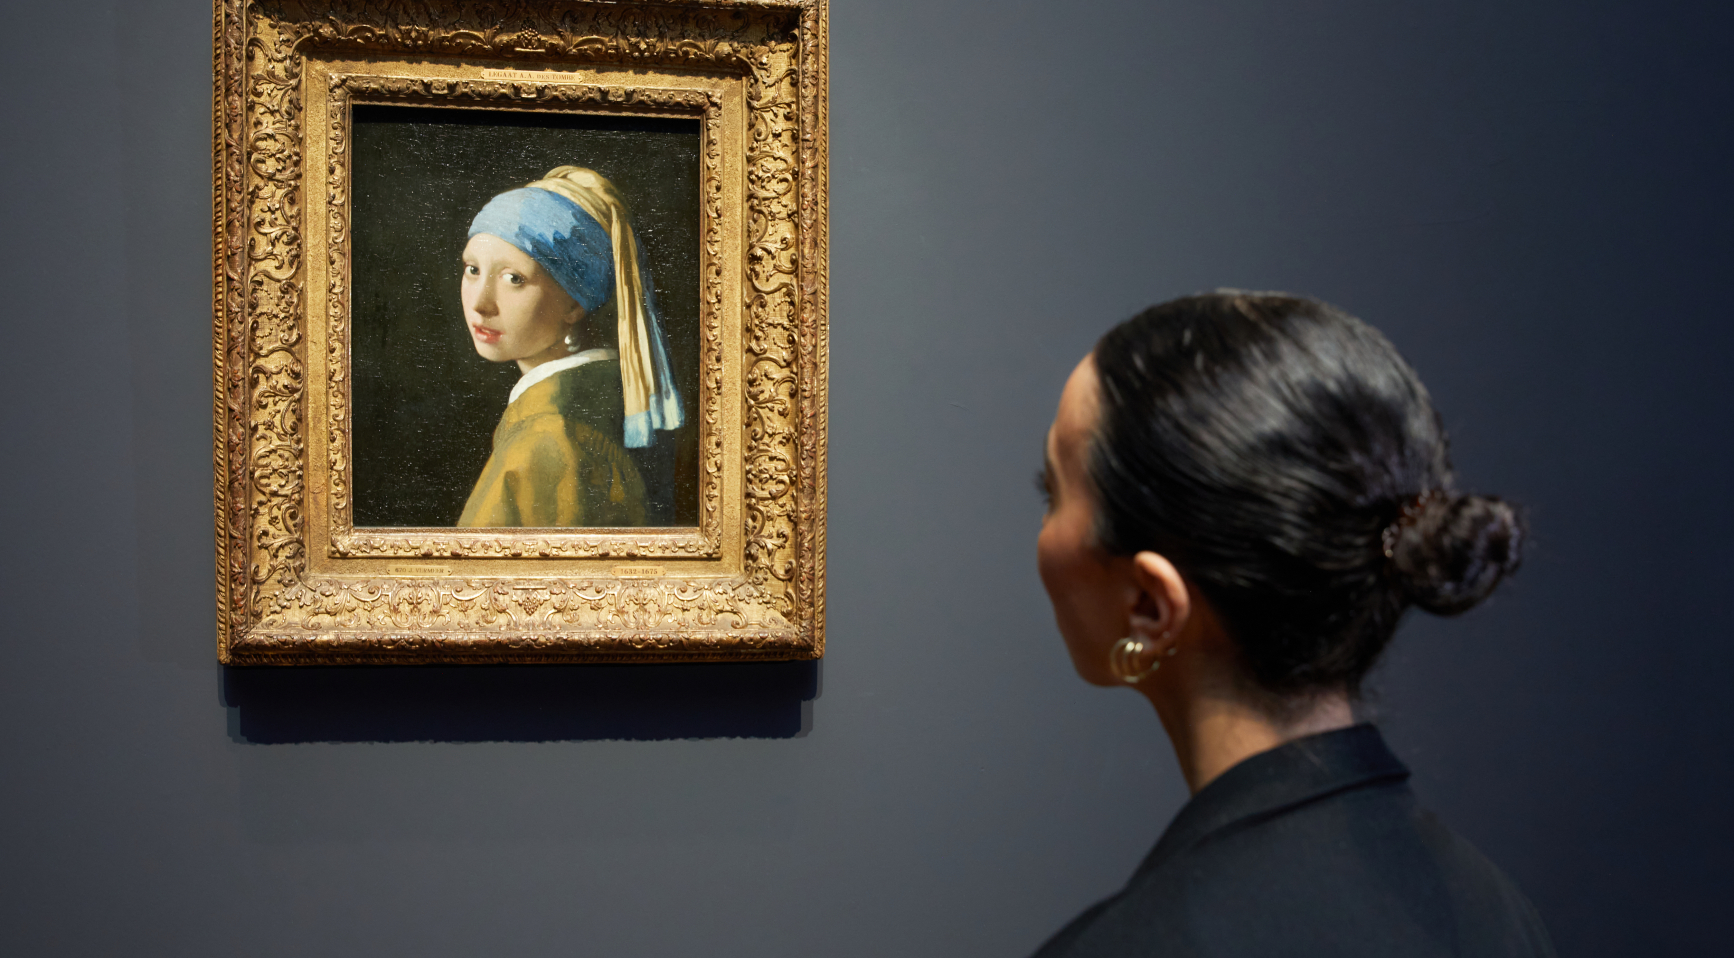 Rijksmuseums Vermeer exhibition began and Girl with a Pearl Earring will remain there through March 30